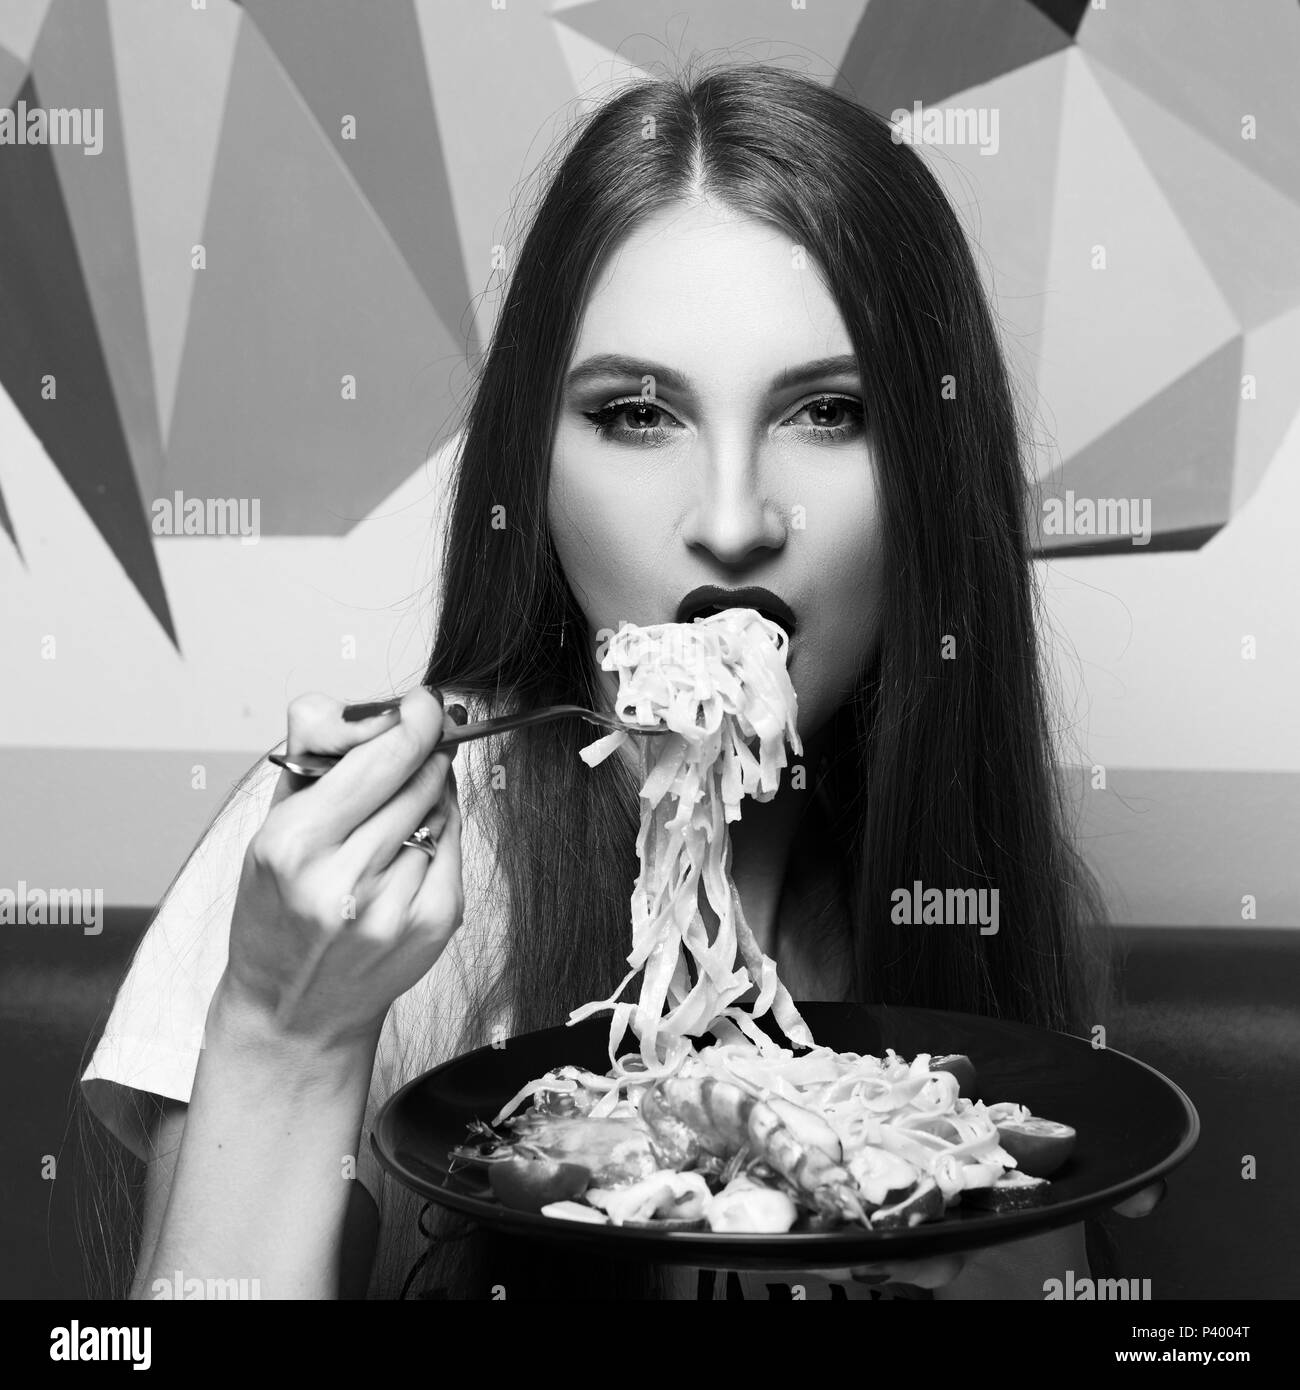 Attractive woman eating seafood pasta Stock Photo